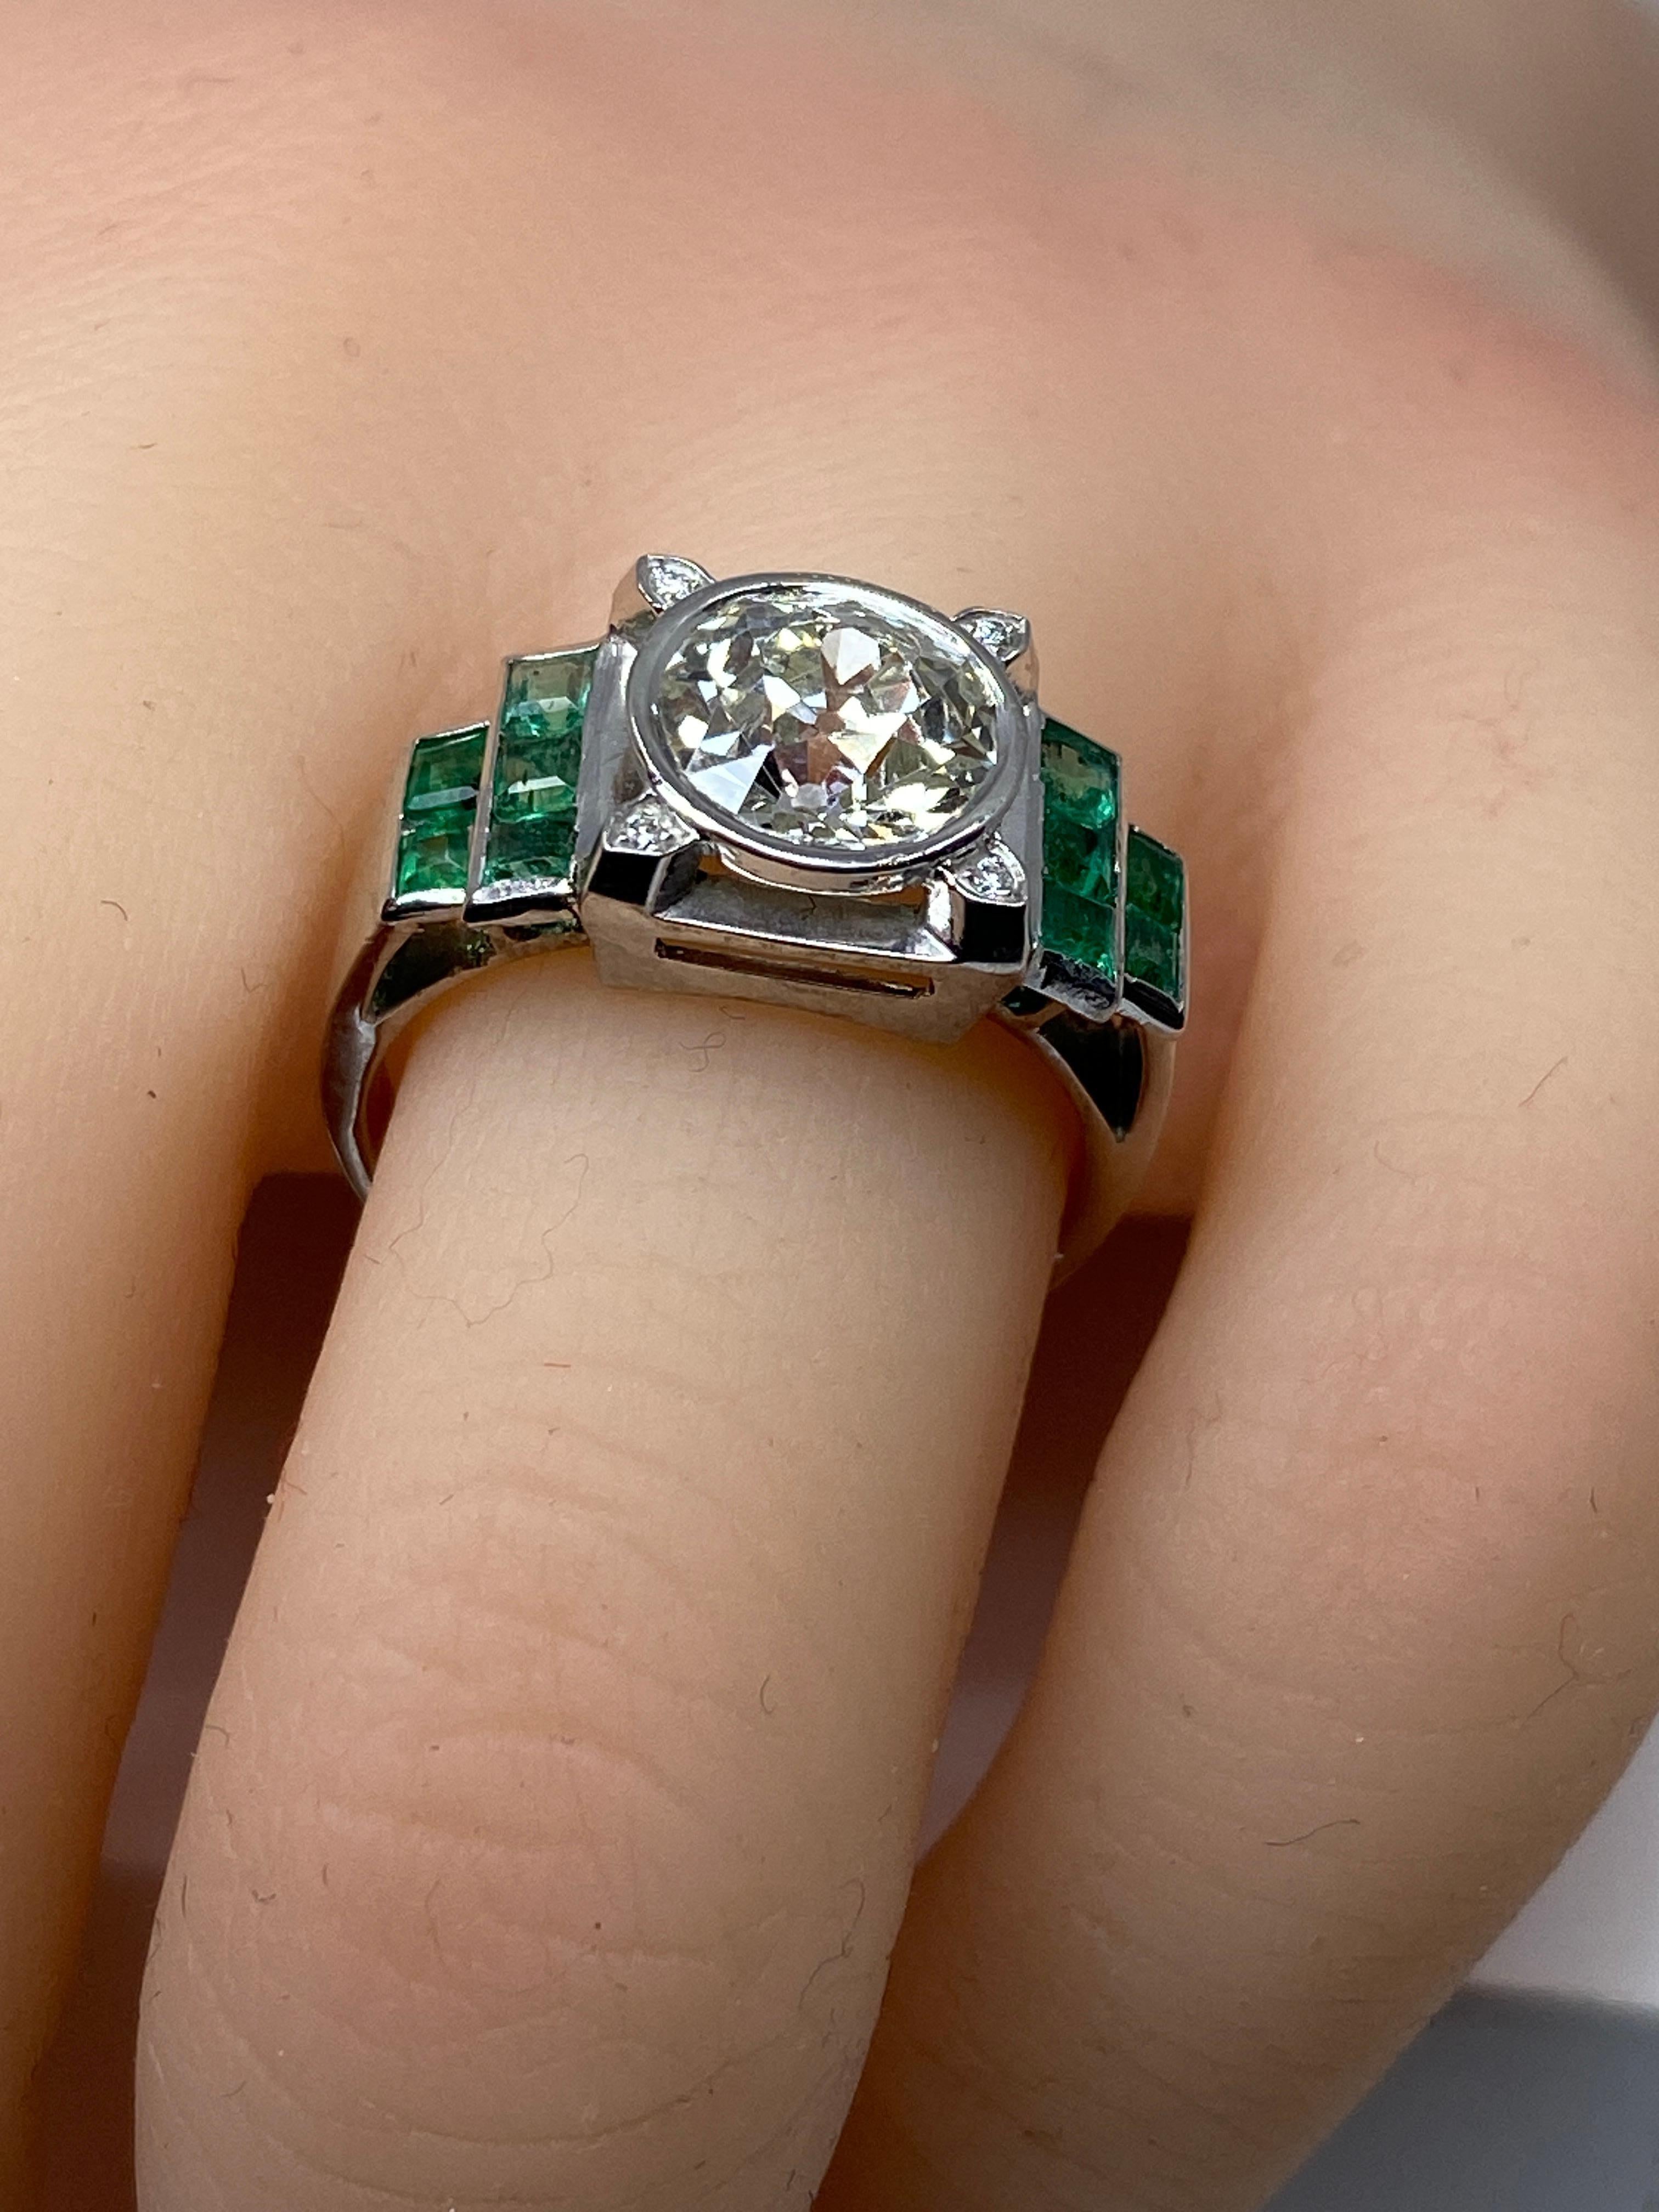 Platinium Engagement Ring Set with a 1.55 Carat Diamond Backed by Emeralds, 1900 For Sale 4